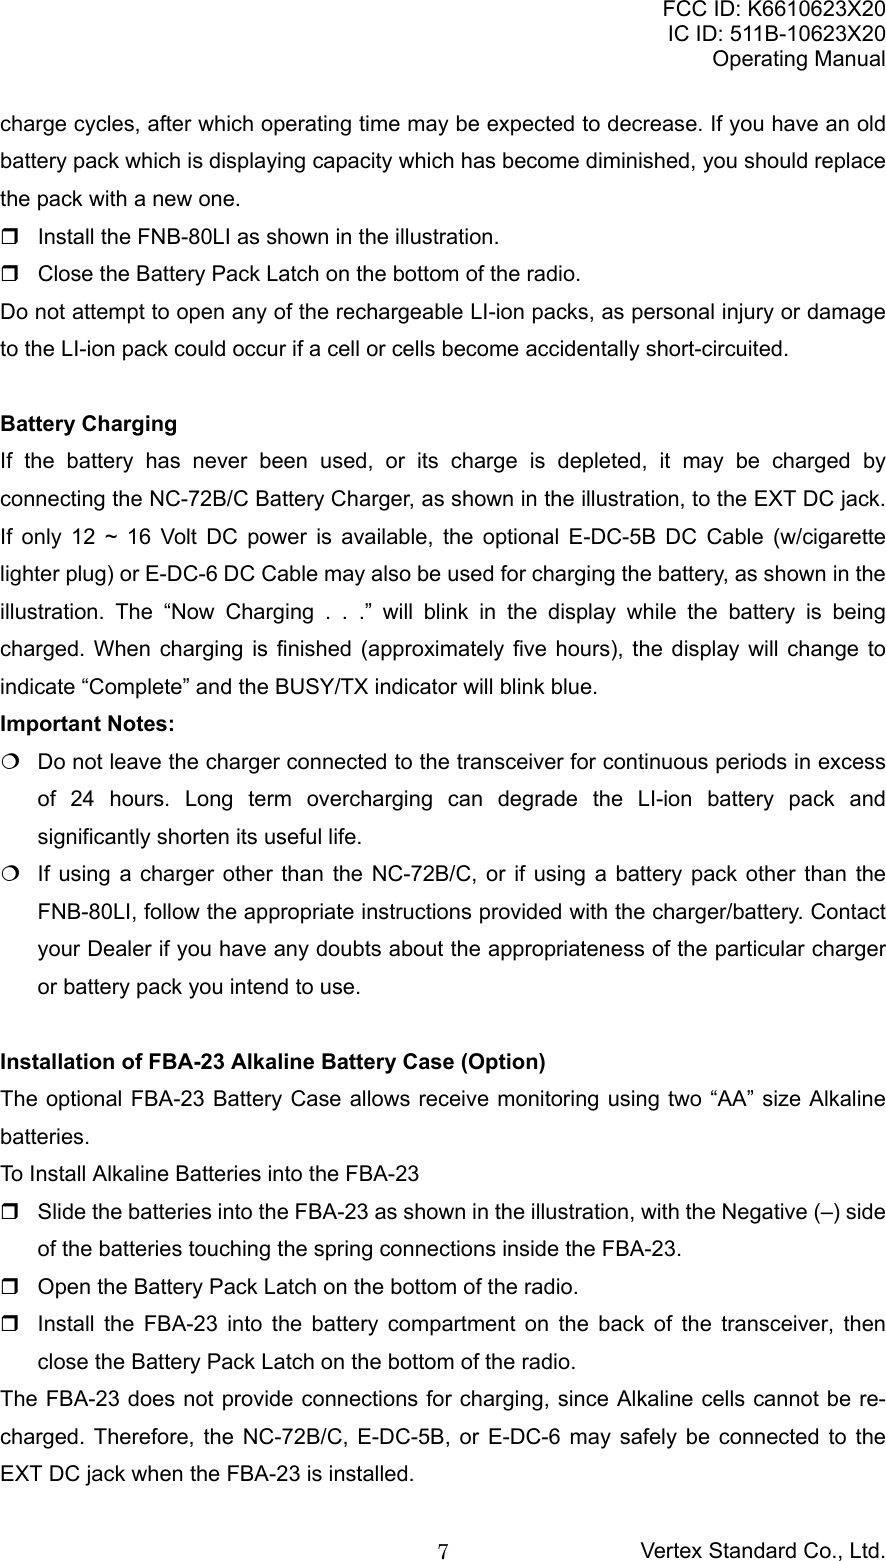 FCC ID: K6610623X20IC ID: 511B-10623X20Operating ManualVertex Standard Co., Ltd.7charge cycles, after which operating time may be expected to decrease. If you have an oldbattery pack which is displaying capacity which has become diminished, you should replacethe pack with a new one.  Install the FNB-80LI as shown in the illustration.  Close the Battery Pack Latch on the bottom of the radio.Do not attempt to open any of the rechargeable LI-ion packs, as personal injury or damageto the LI-ion pack could occur if a cell or cells become accidentally short-circuited.Battery ChargingIf the battery has never been used, or its charge is depleted, it may be charged byconnecting the NC-72B/C Battery Charger, as shown in the illustration, to the EXT DC jack.If only 12 ~ 16 Volt DC power is available, the optional E-DC-5B DC Cable (w/cigarettelighter plug) or E-DC-6 DC Cable may also be used for charging the battery, as shown in theillustration. The “Now Charging . . .” will blink in the display while the battery is beingcharged. When charging is finished (approximately five hours), the display will change toindicate “Complete” and the BUSY/TX indicator will blink blue.Important Notes:  Do not leave the charger connected to the transceiver for continuous periods in excessof 24 hours. Long term overcharging can degrade the LI-ion battery pack andsignificantly shorten its useful life.  If using a charger other than the NC-72B/C, or if using a battery pack other than theFNB-80LI, follow the appropriate instructions provided with the charger/battery. Contactyour Dealer if you have any doubts about the appropriateness of the particular chargeror battery pack you intend to use.Installation of FBA-23 Alkaline Battery Case (Option)The optional FBA-23 Battery Case allows receive monitoring using two “AA” size Alkalinebatteries.To Install Alkaline Batteries into the FBA-23  Slide the batteries into the FBA-23 as shown in the illustration, with the Negative (–) sideof the batteries touching the spring connections inside the FBA-23.  Open the Battery Pack Latch on the bottom of the radio.  Install the FBA-23 into the battery compartment on the back of the transceiver, thenclose the Battery Pack Latch on the bottom of the radio.The FBA-23 does not provide connections for charging, since Alkaline cells cannot be re-charged. Therefore, the NC-72B/C, E-DC-5B, or E-DC-6 may safely be connected to theEXT DC jack when the FBA-23 is installed.